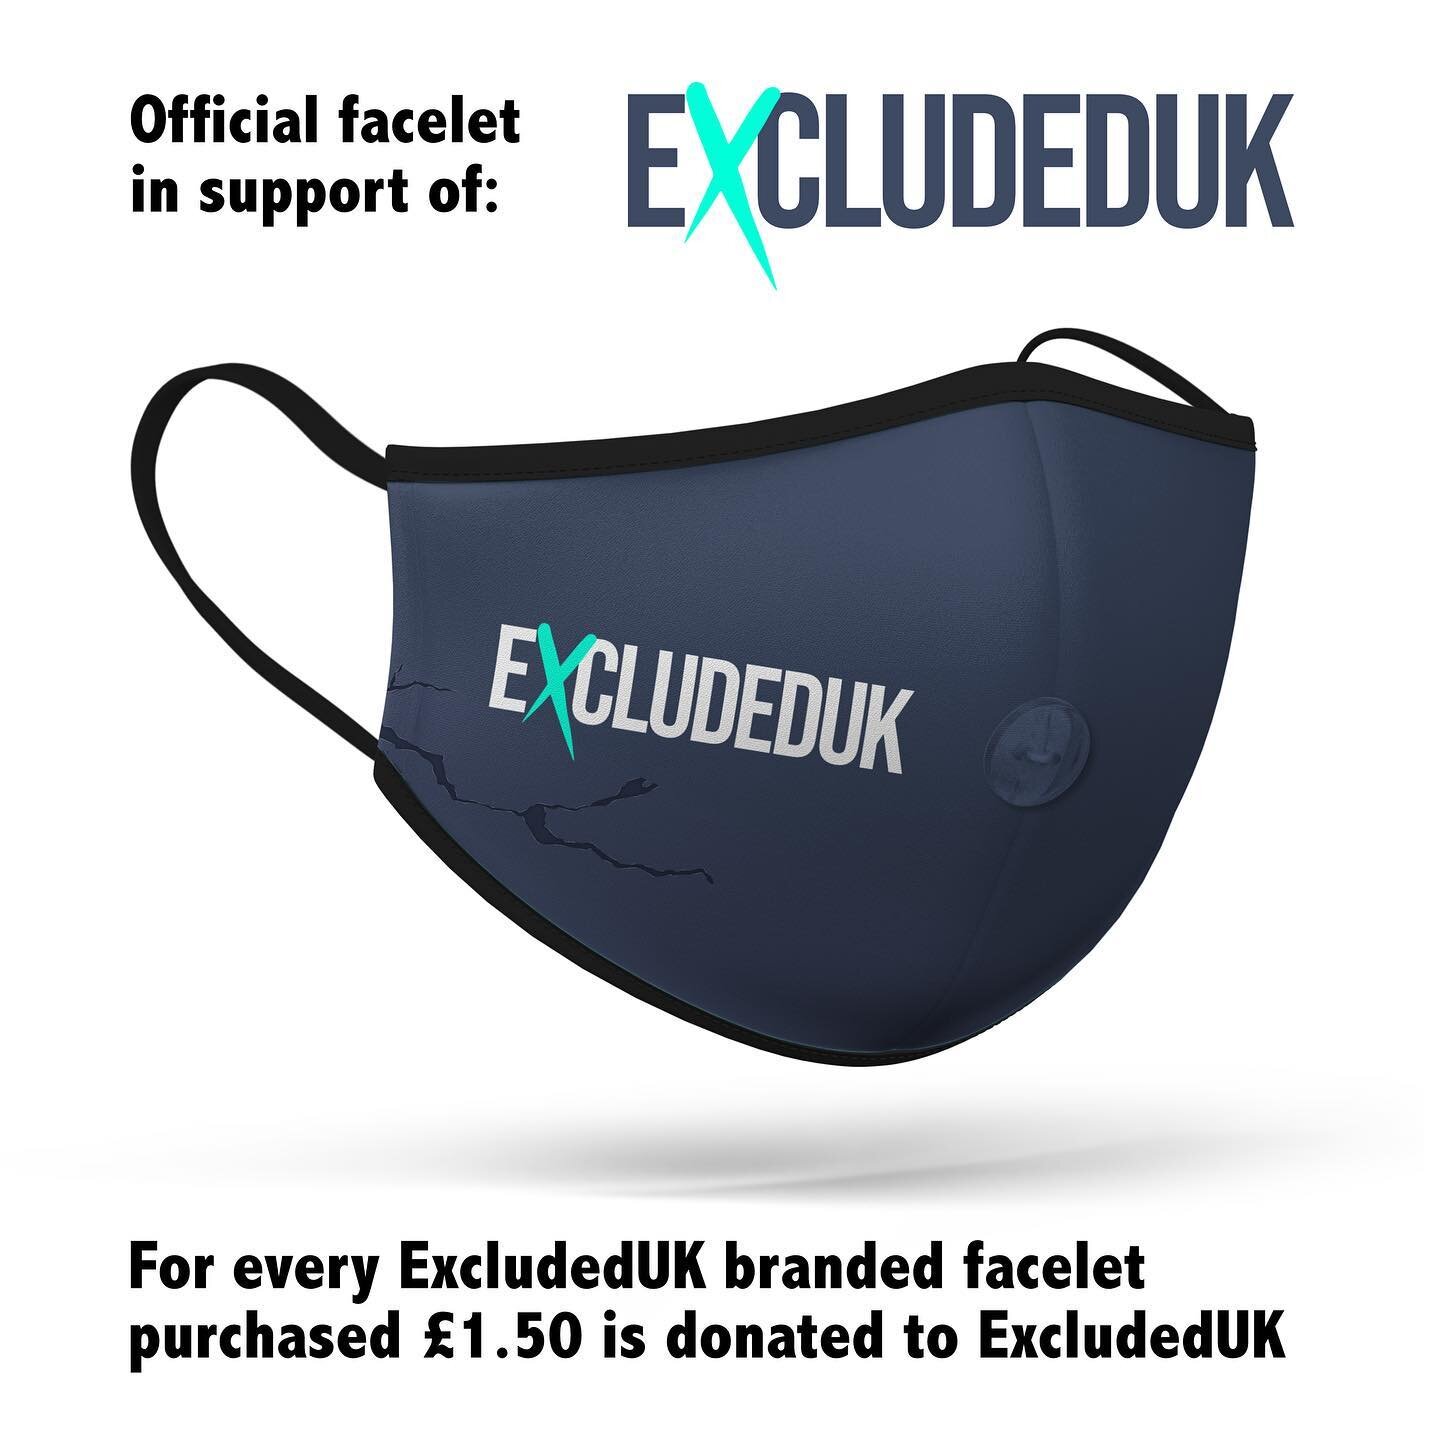 We&rsquo;re delighted to have made our 1st donation to @excludedukofficial today as a result of the #excludeduk branded #thefacelet sold to date. Keep up the good work! #staysafe